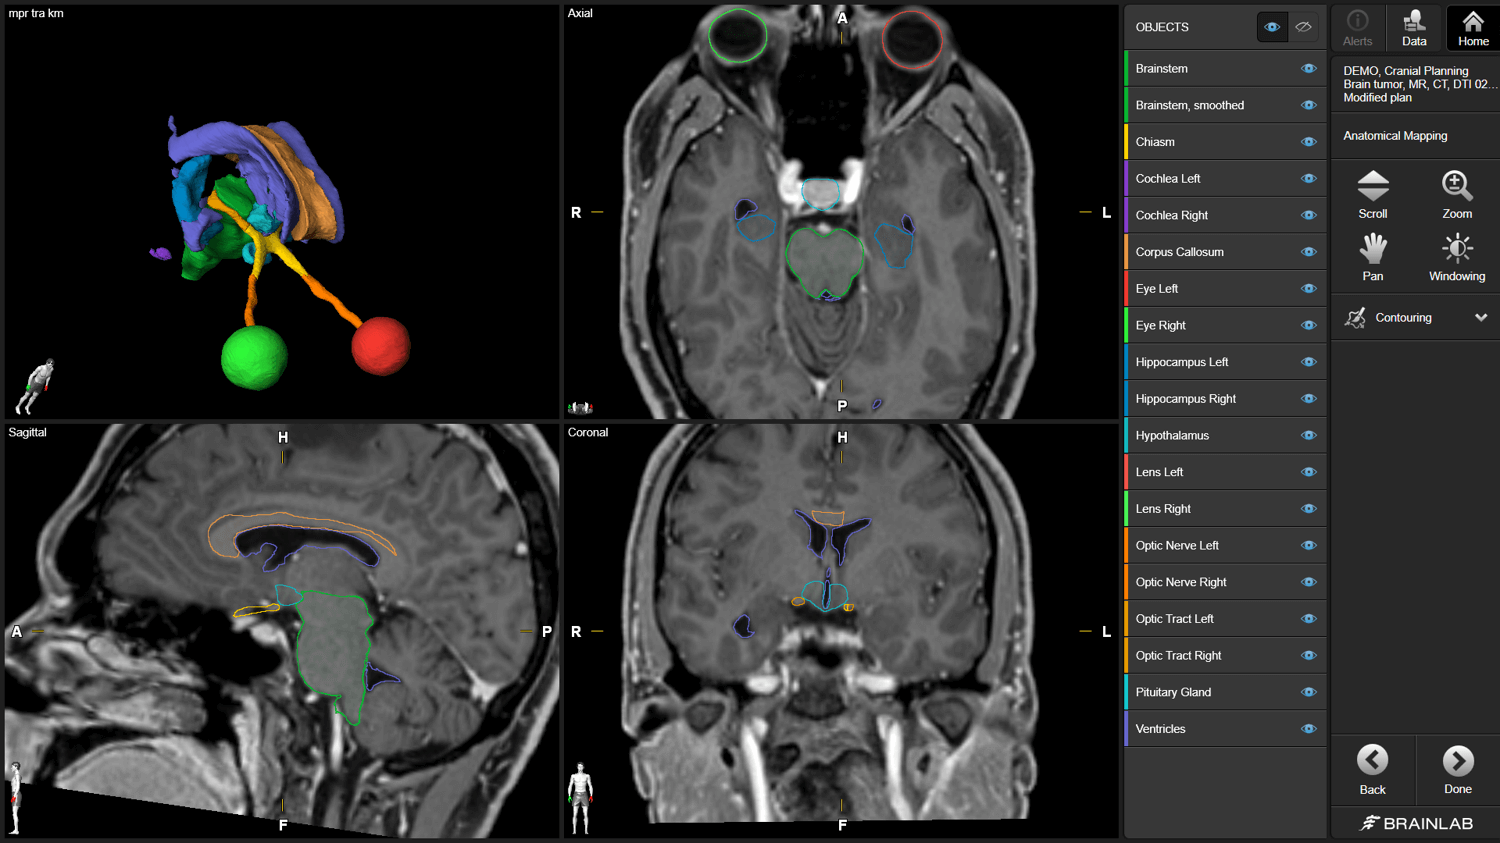 Software screenshot of Anatomical Mapping software used to segment different structures of the brain for radiotherapy treatment planning.